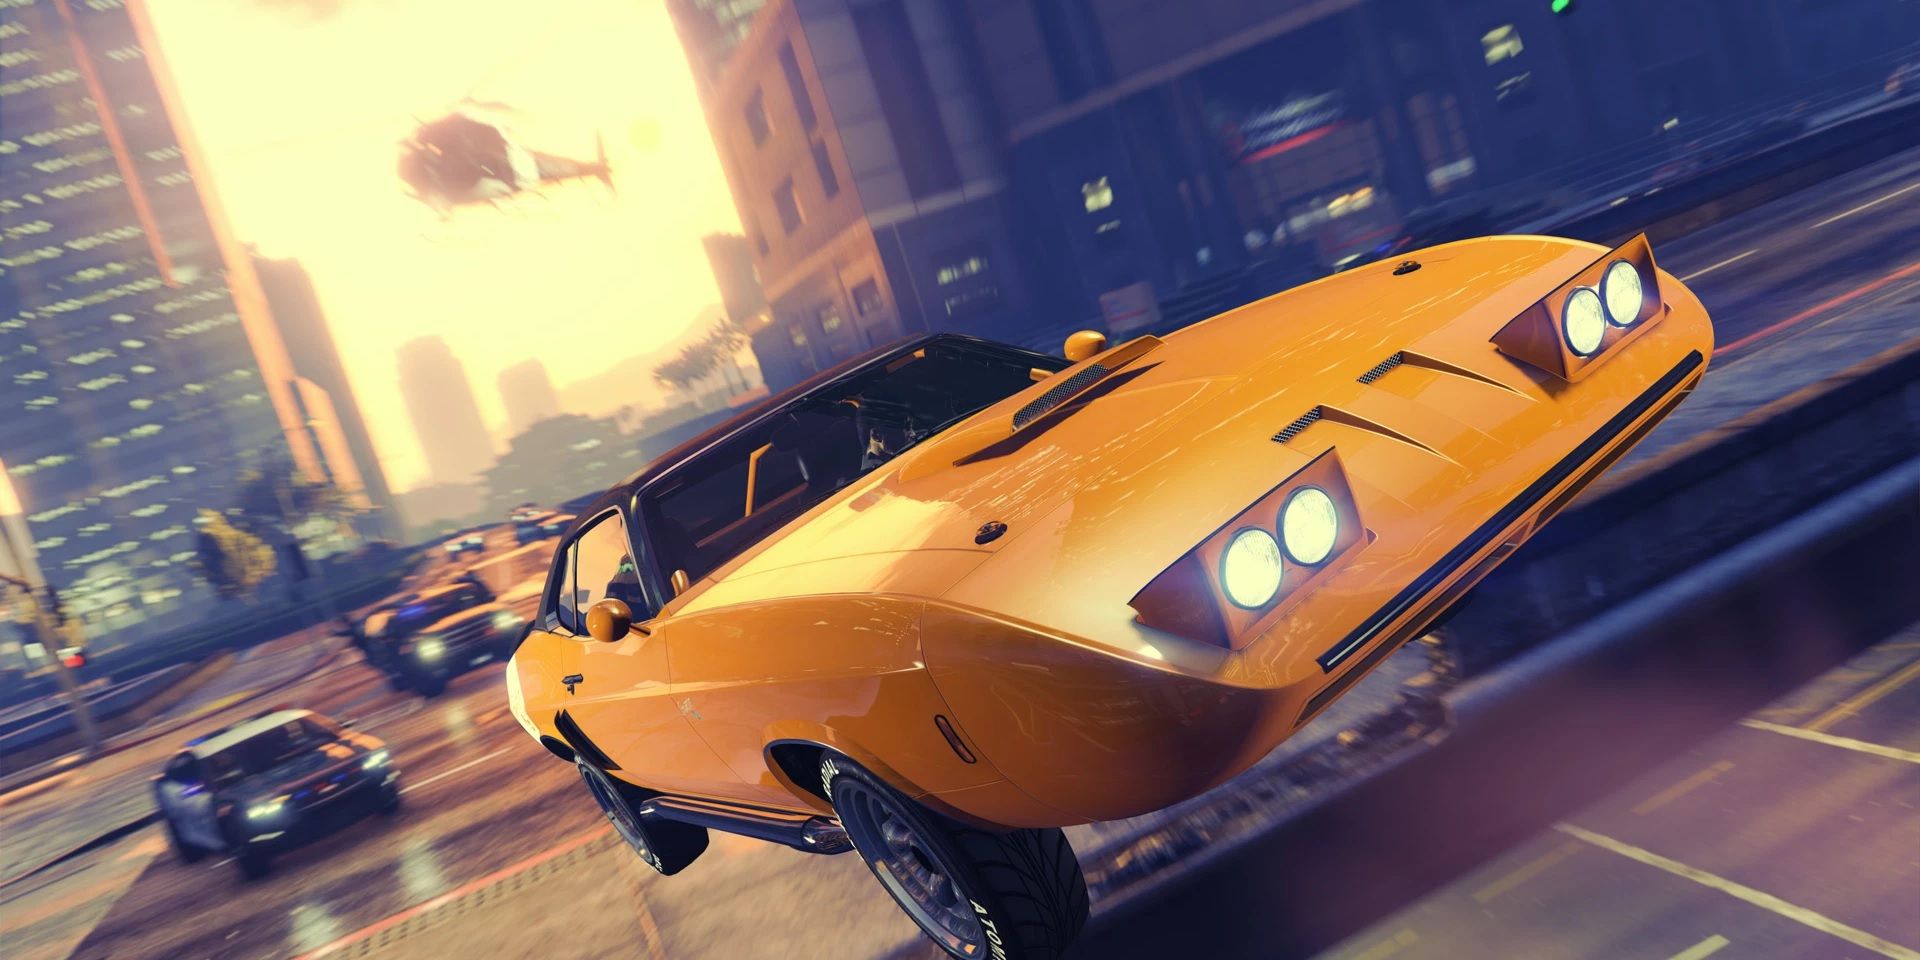 GTA Online summer update for Grand Theft Auto V, adding new cars and races.